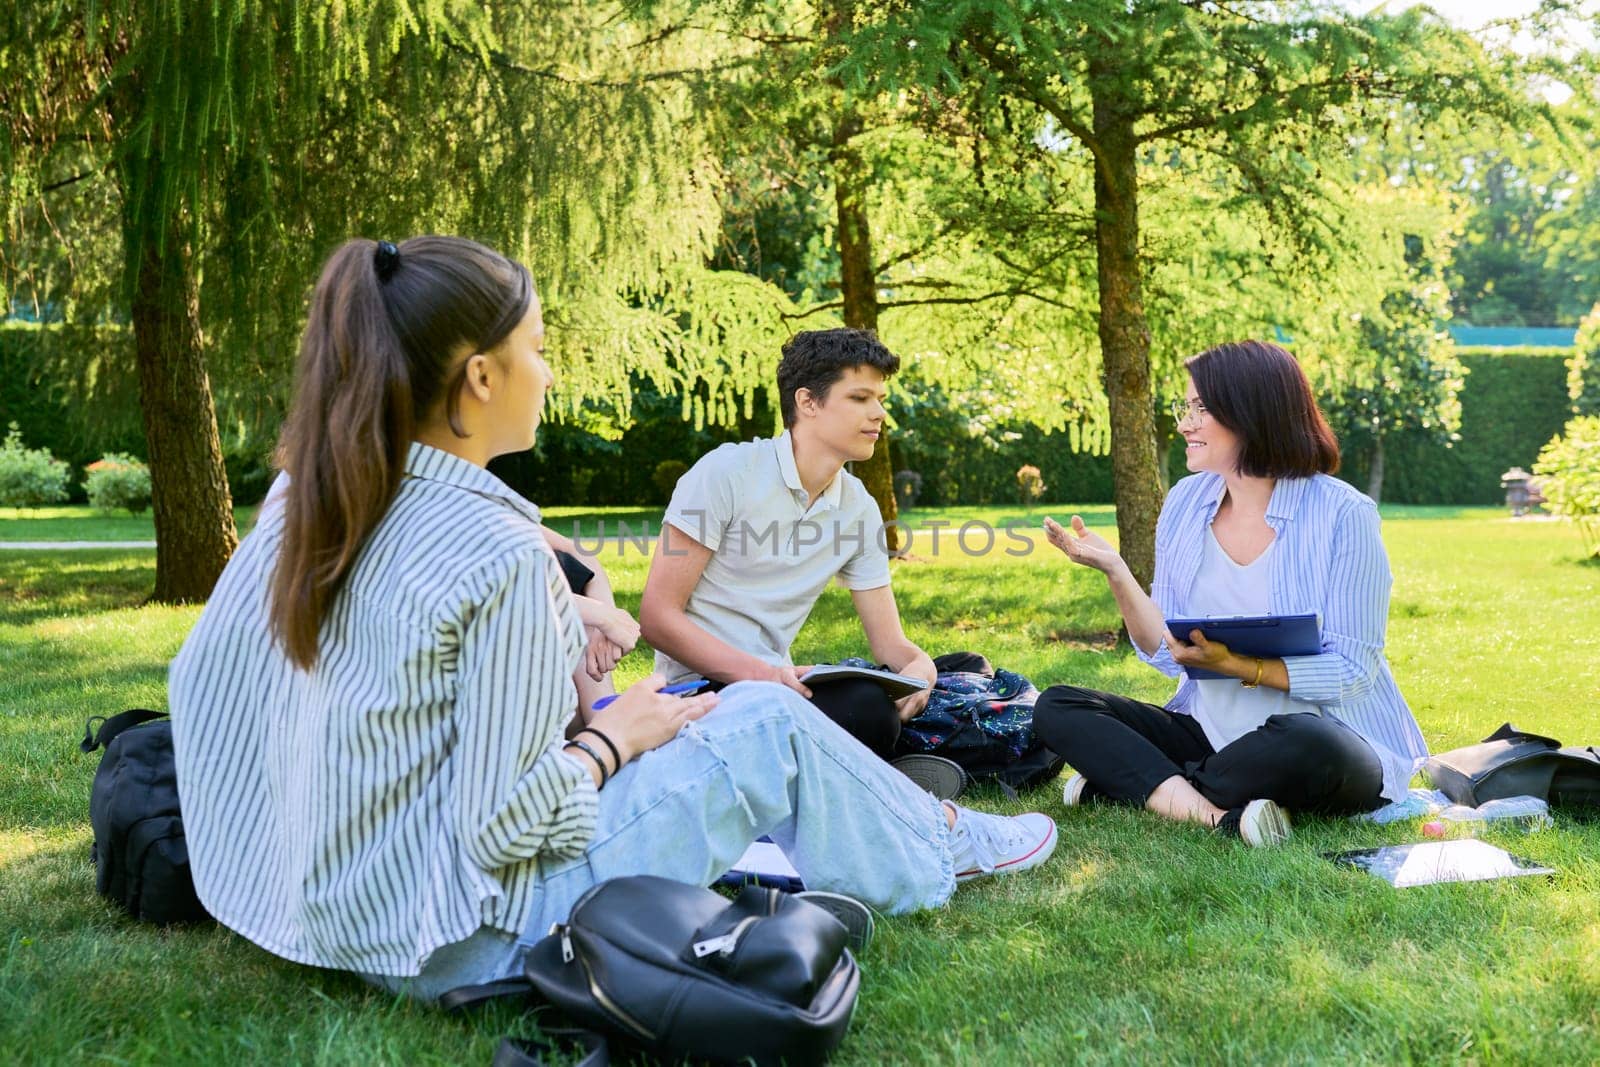 Group of high school students with female teacher, outdoor on campus lawn. Education, college, training, teenagers concept